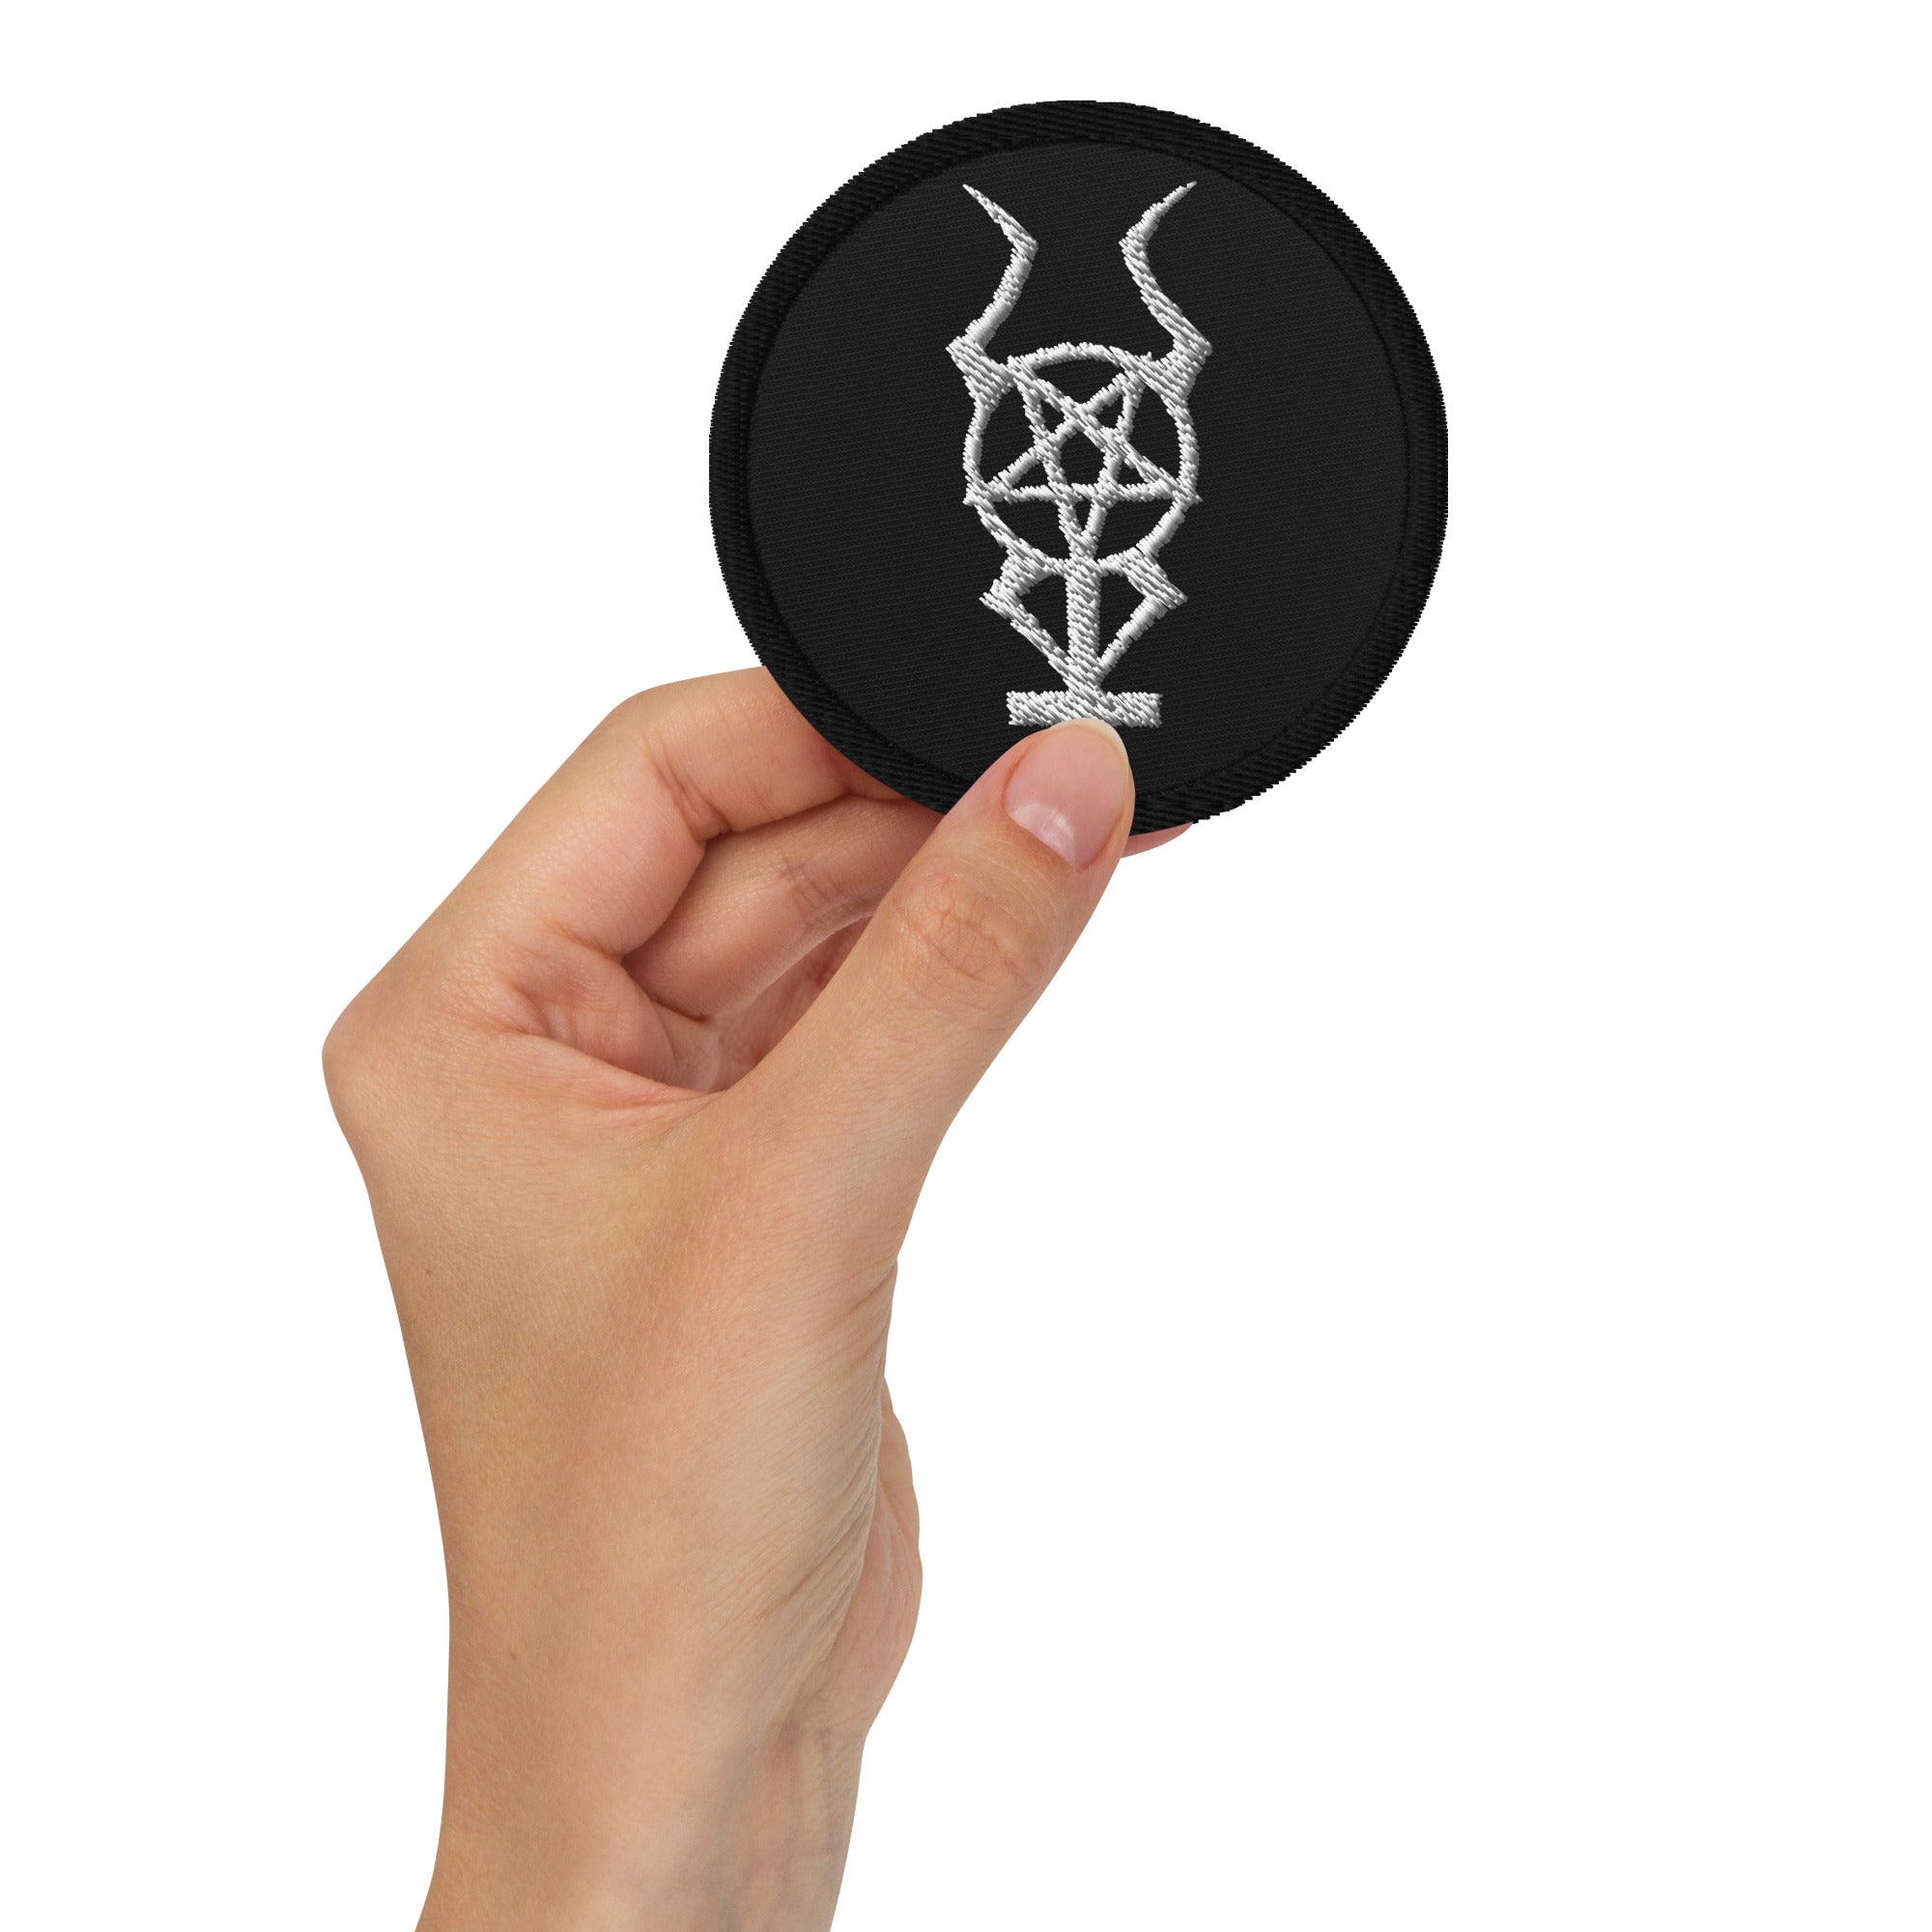 Horned Pentacross Inverted Cross w/ Pentagram and Horns Embroidered Patch - Edge of Life Designs